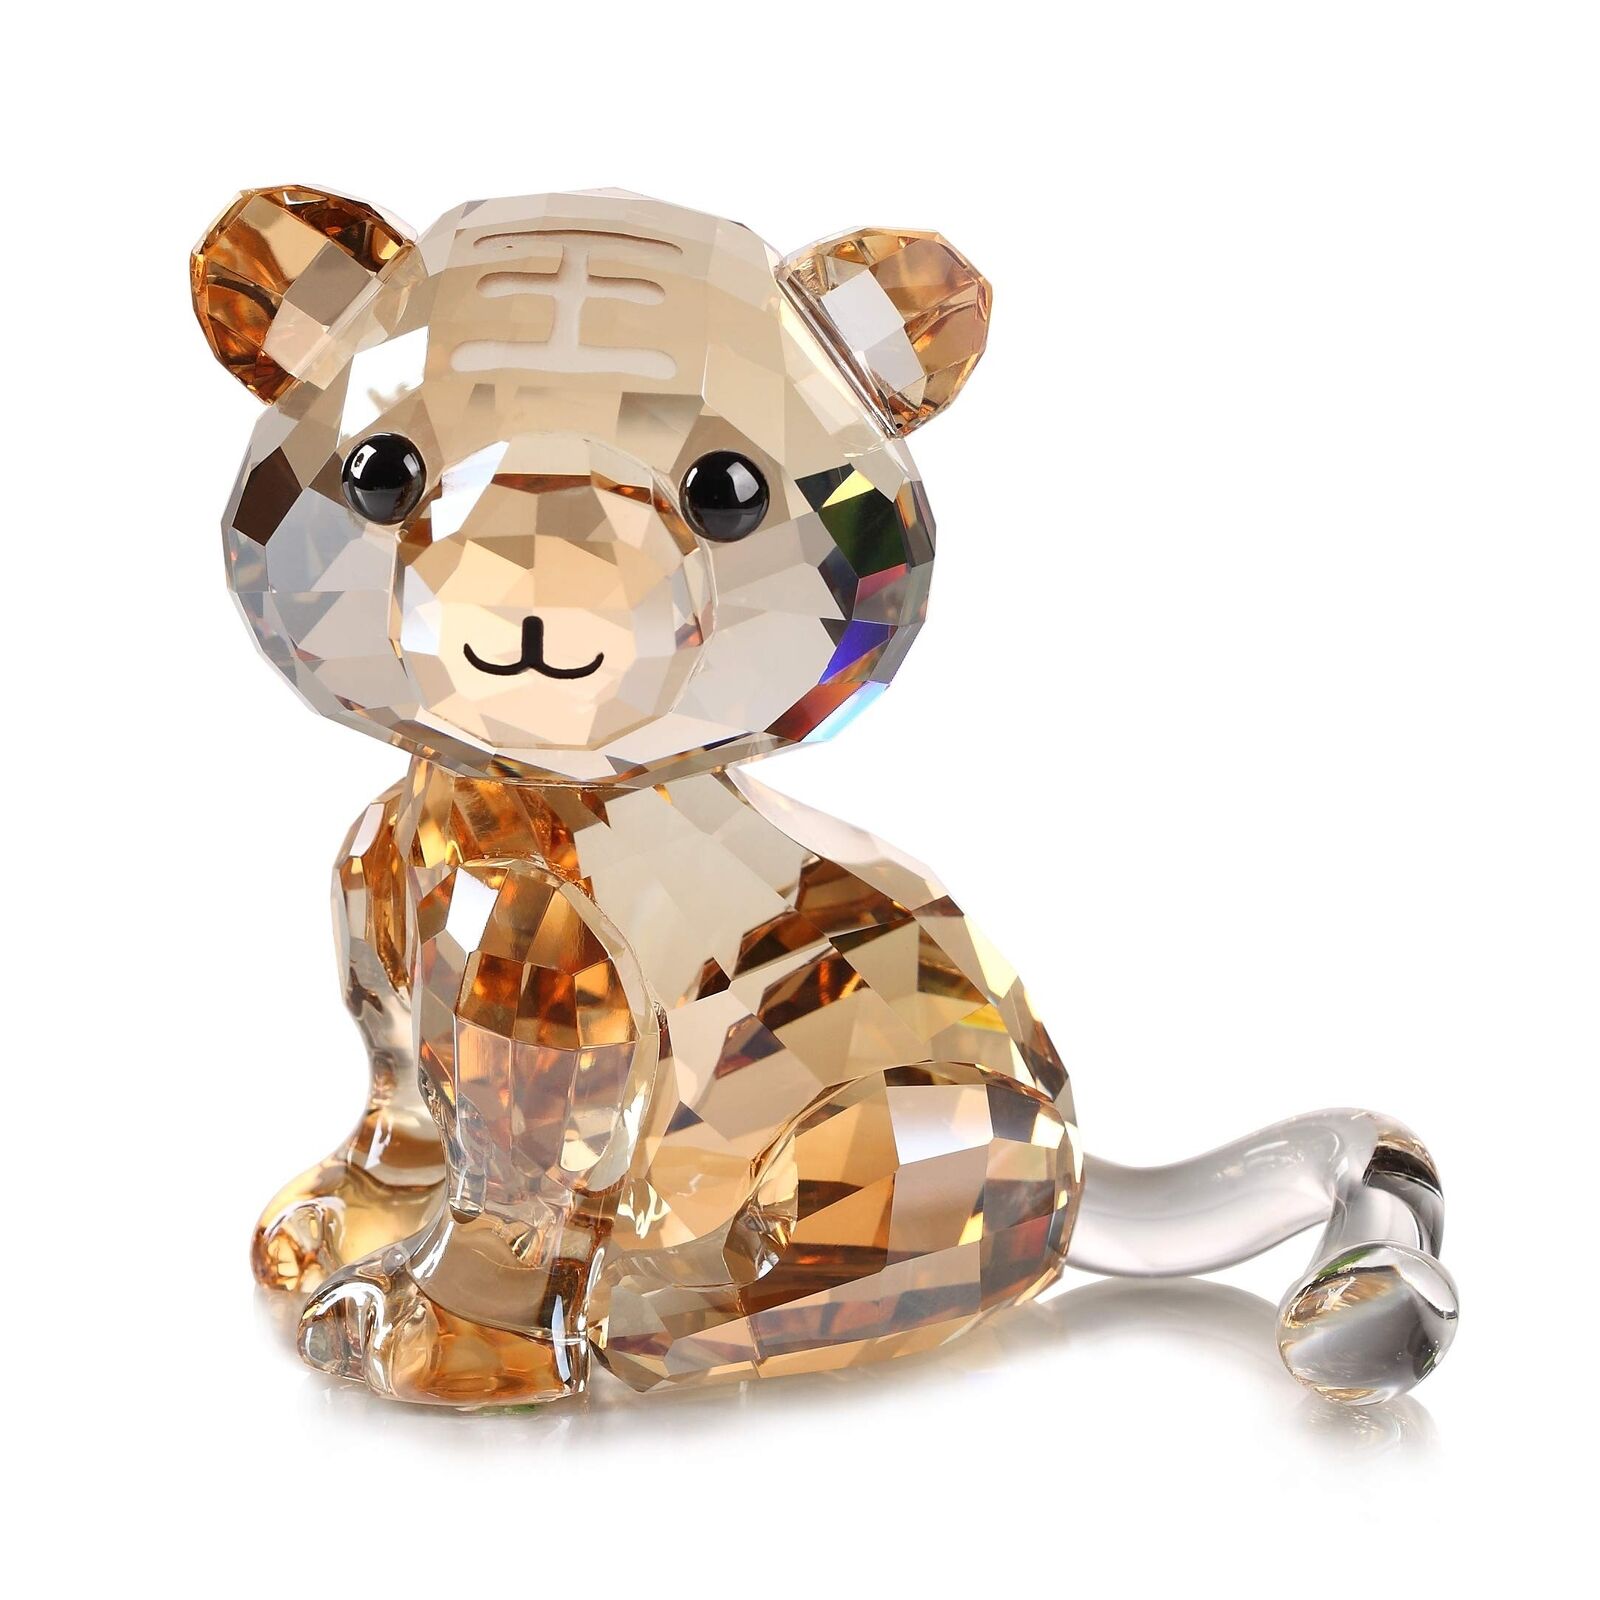 Crystal Tiger Figurine Lovely Cartoon Zodiac Collectible Ornament Animal Home...